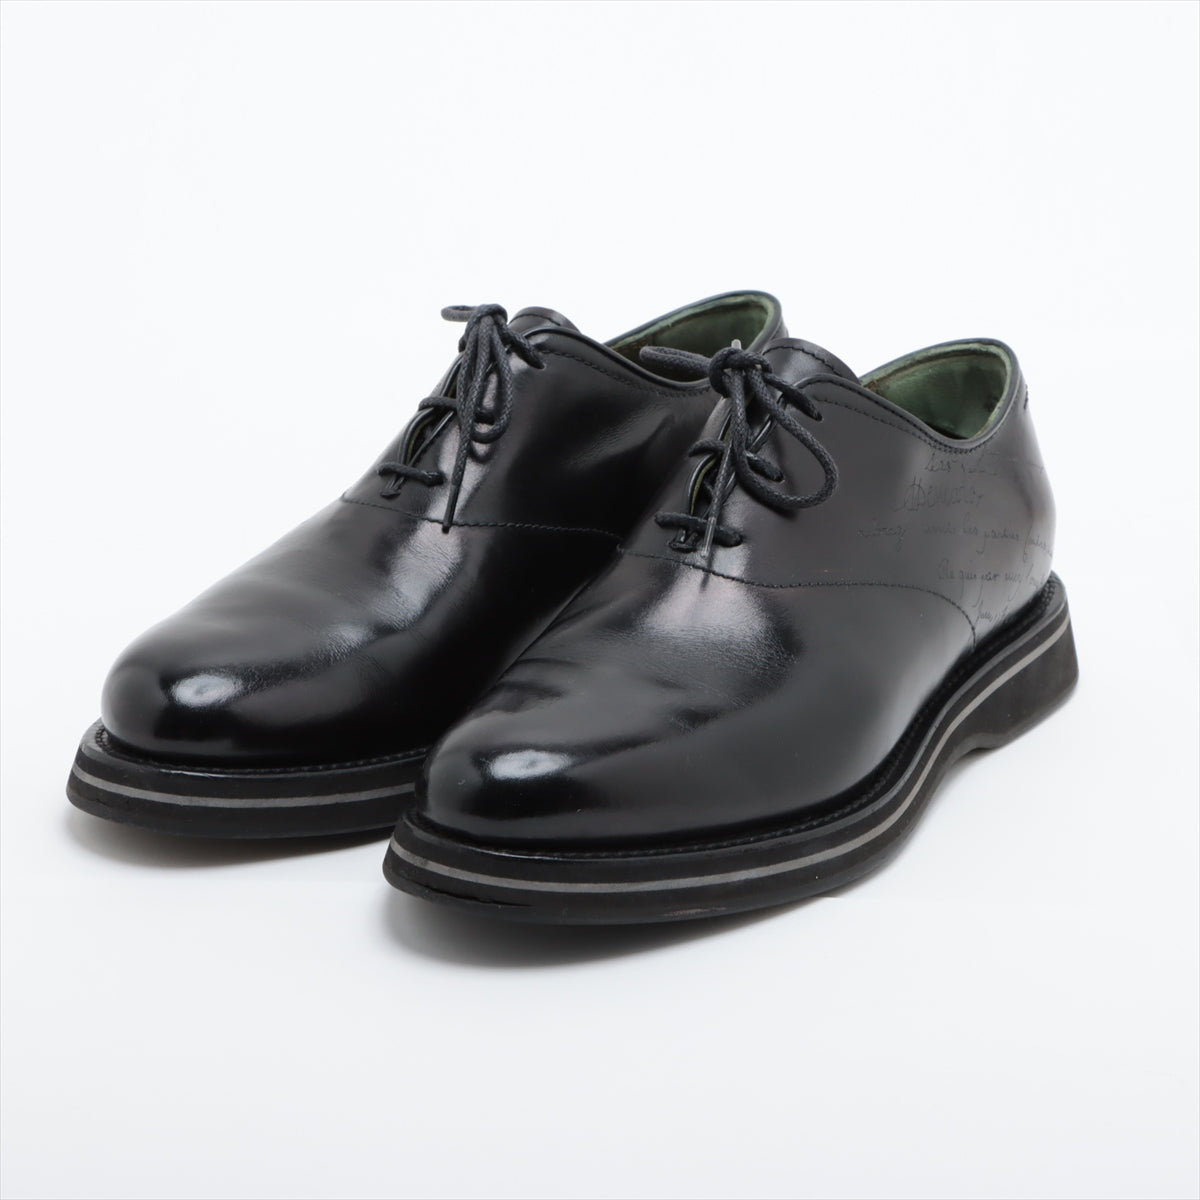 Berluti Leather Leather shoes 10 Men's Black Calligraphy Comes with genuine shoe tree